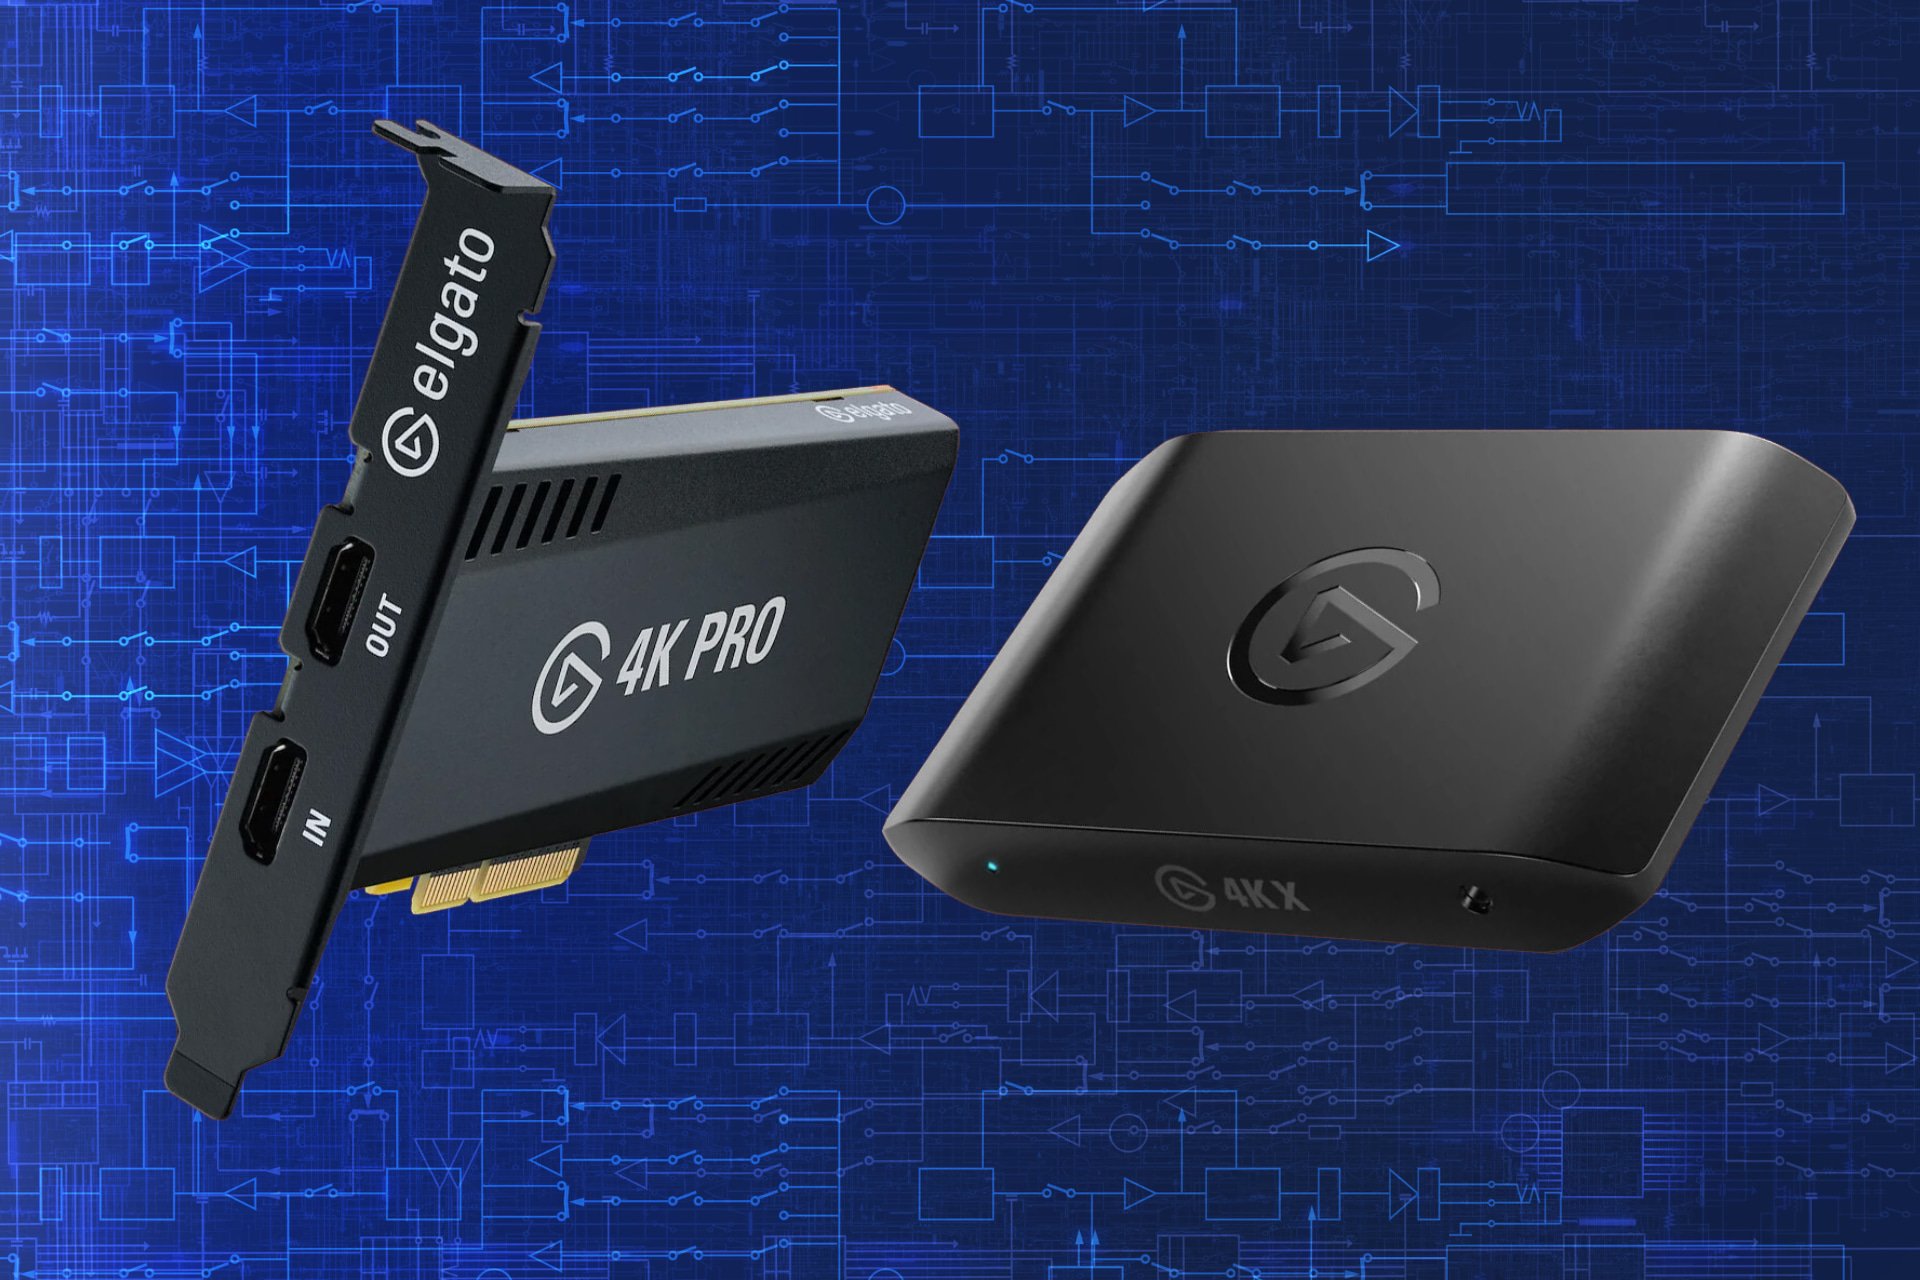 Elgato’s HDMI 2.1 capture cards 4K X and 4K Pro feature HDR and great frame rates